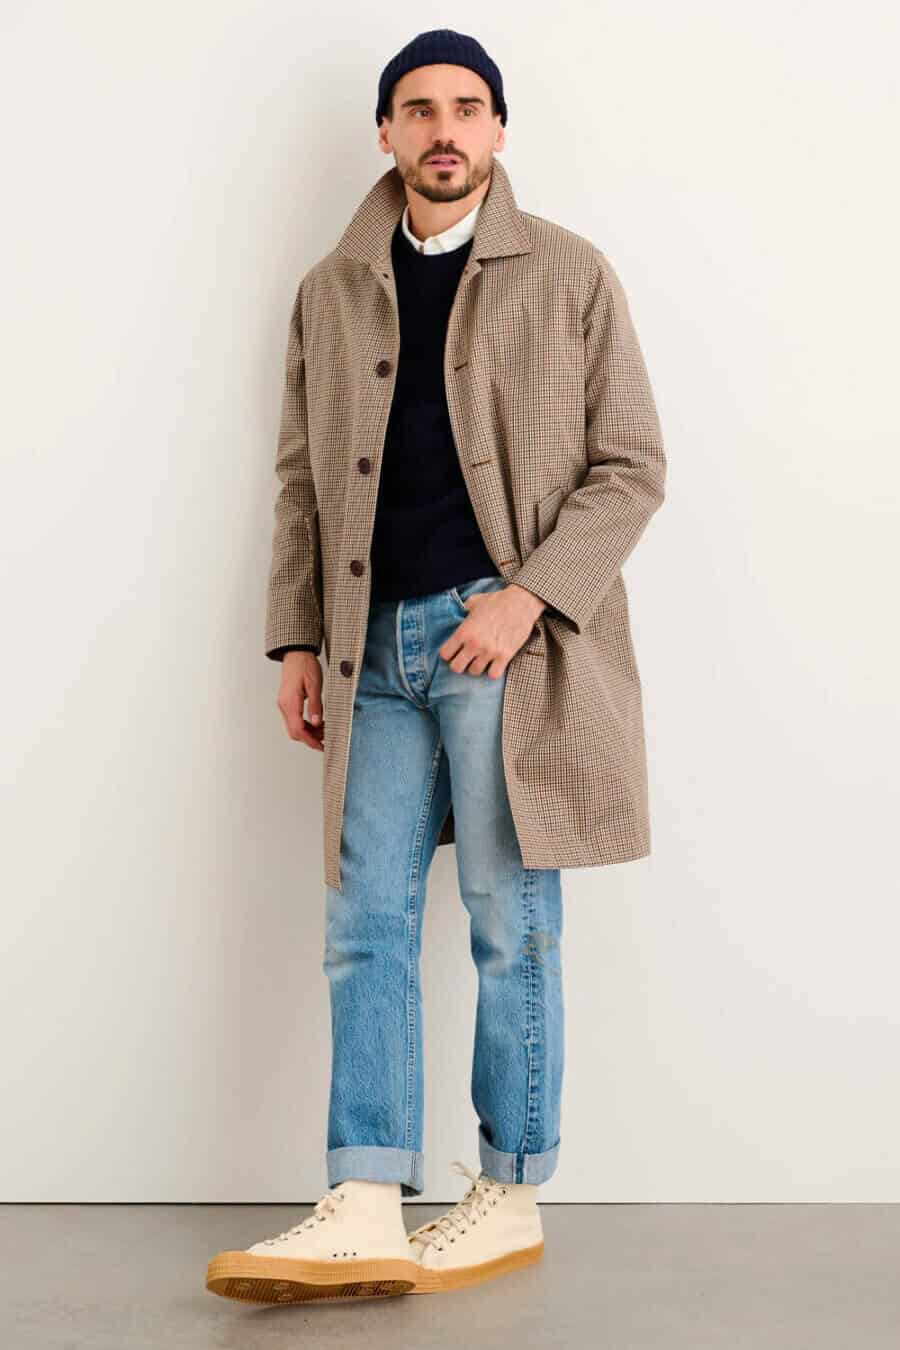 Men's fashion outfit - lightweight layers